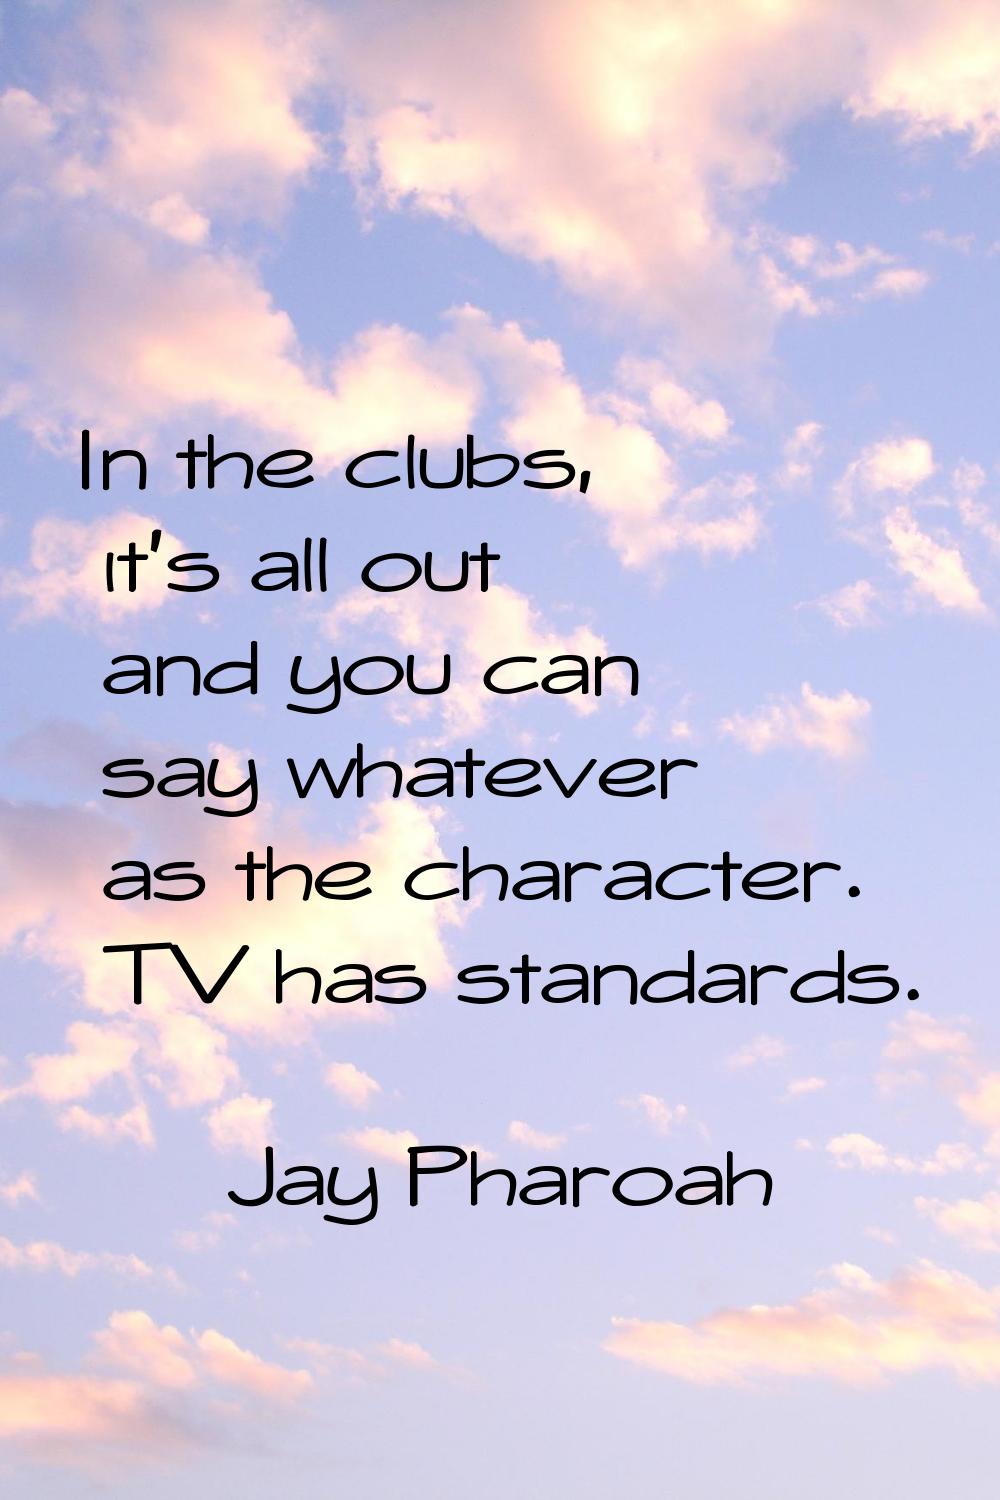 In the clubs, it's all out and you can say whatever as the character. TV has standards.